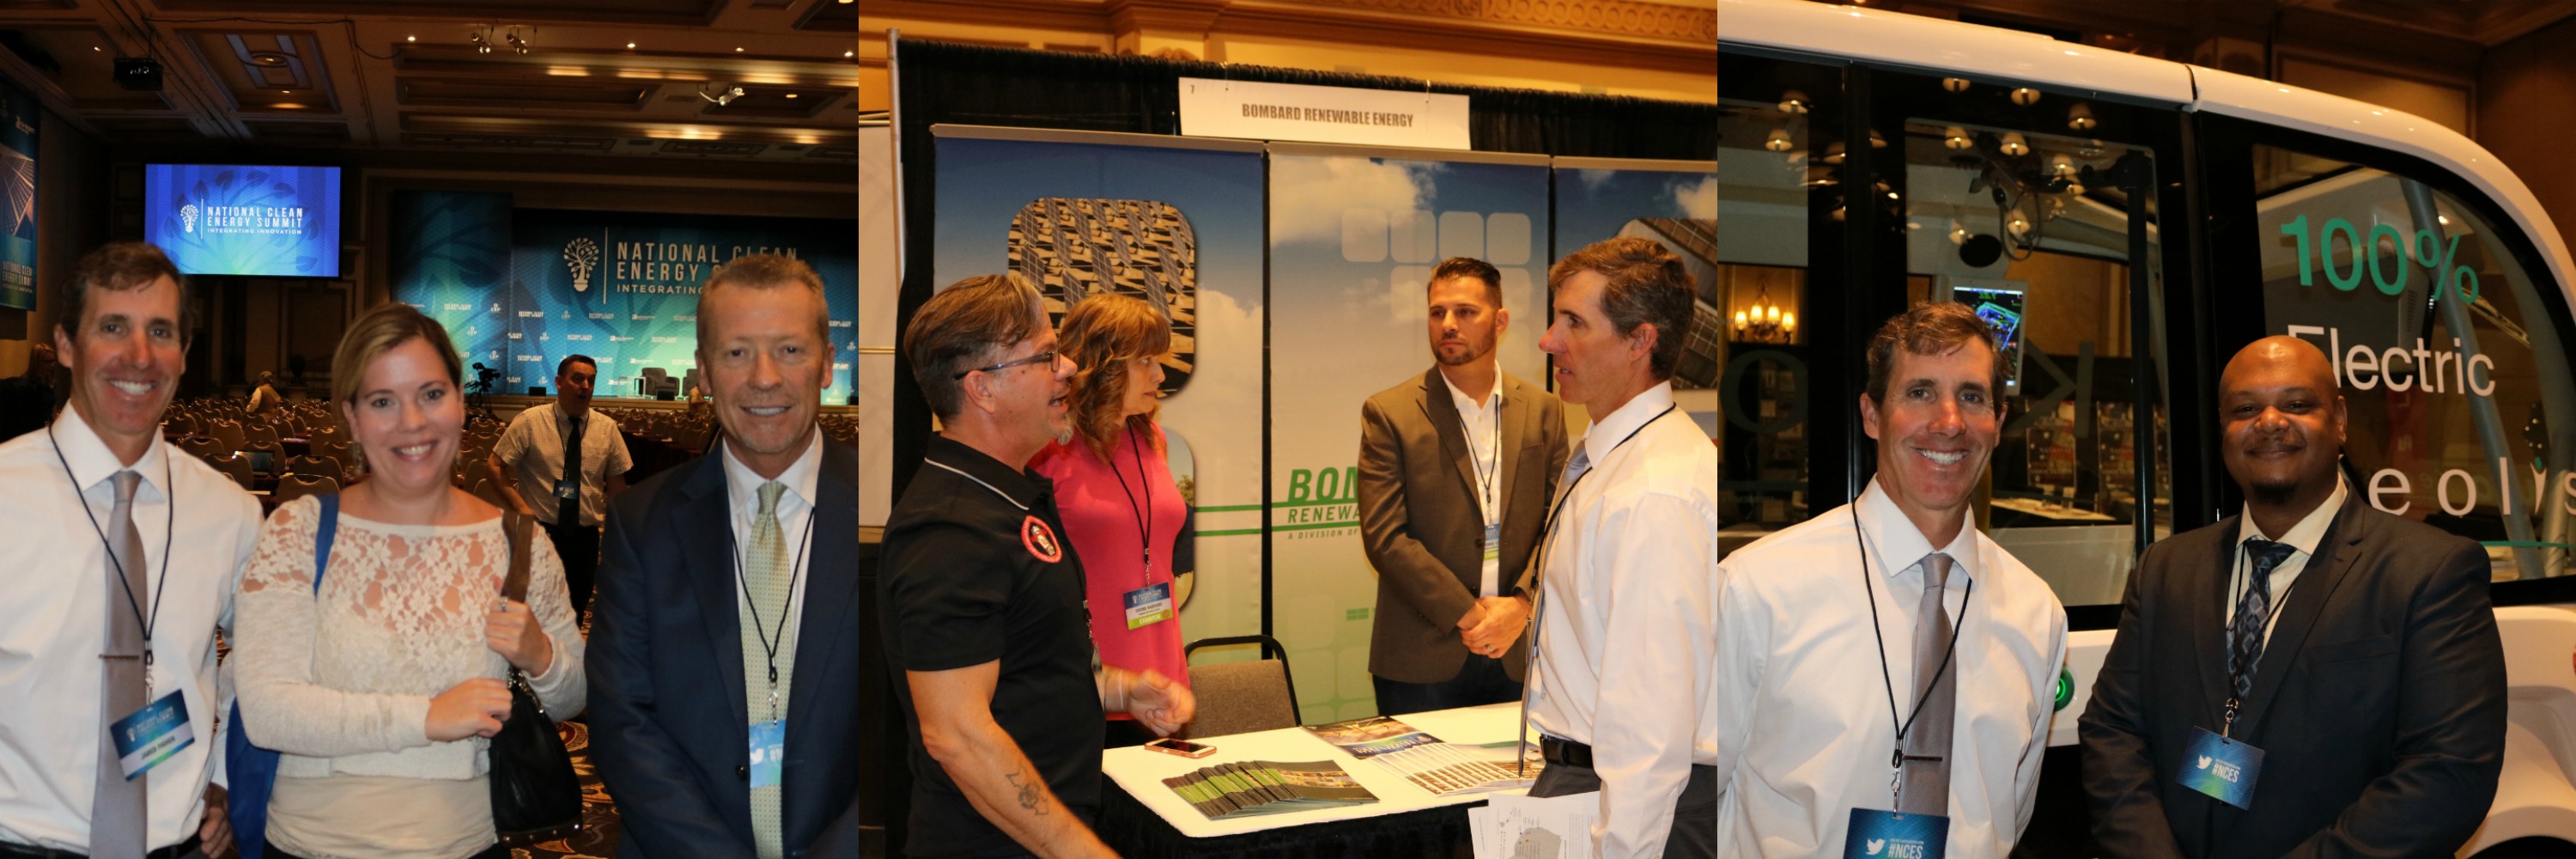 Jared Fisher and attendees at the National Clean Energy Summit in Las Vegas